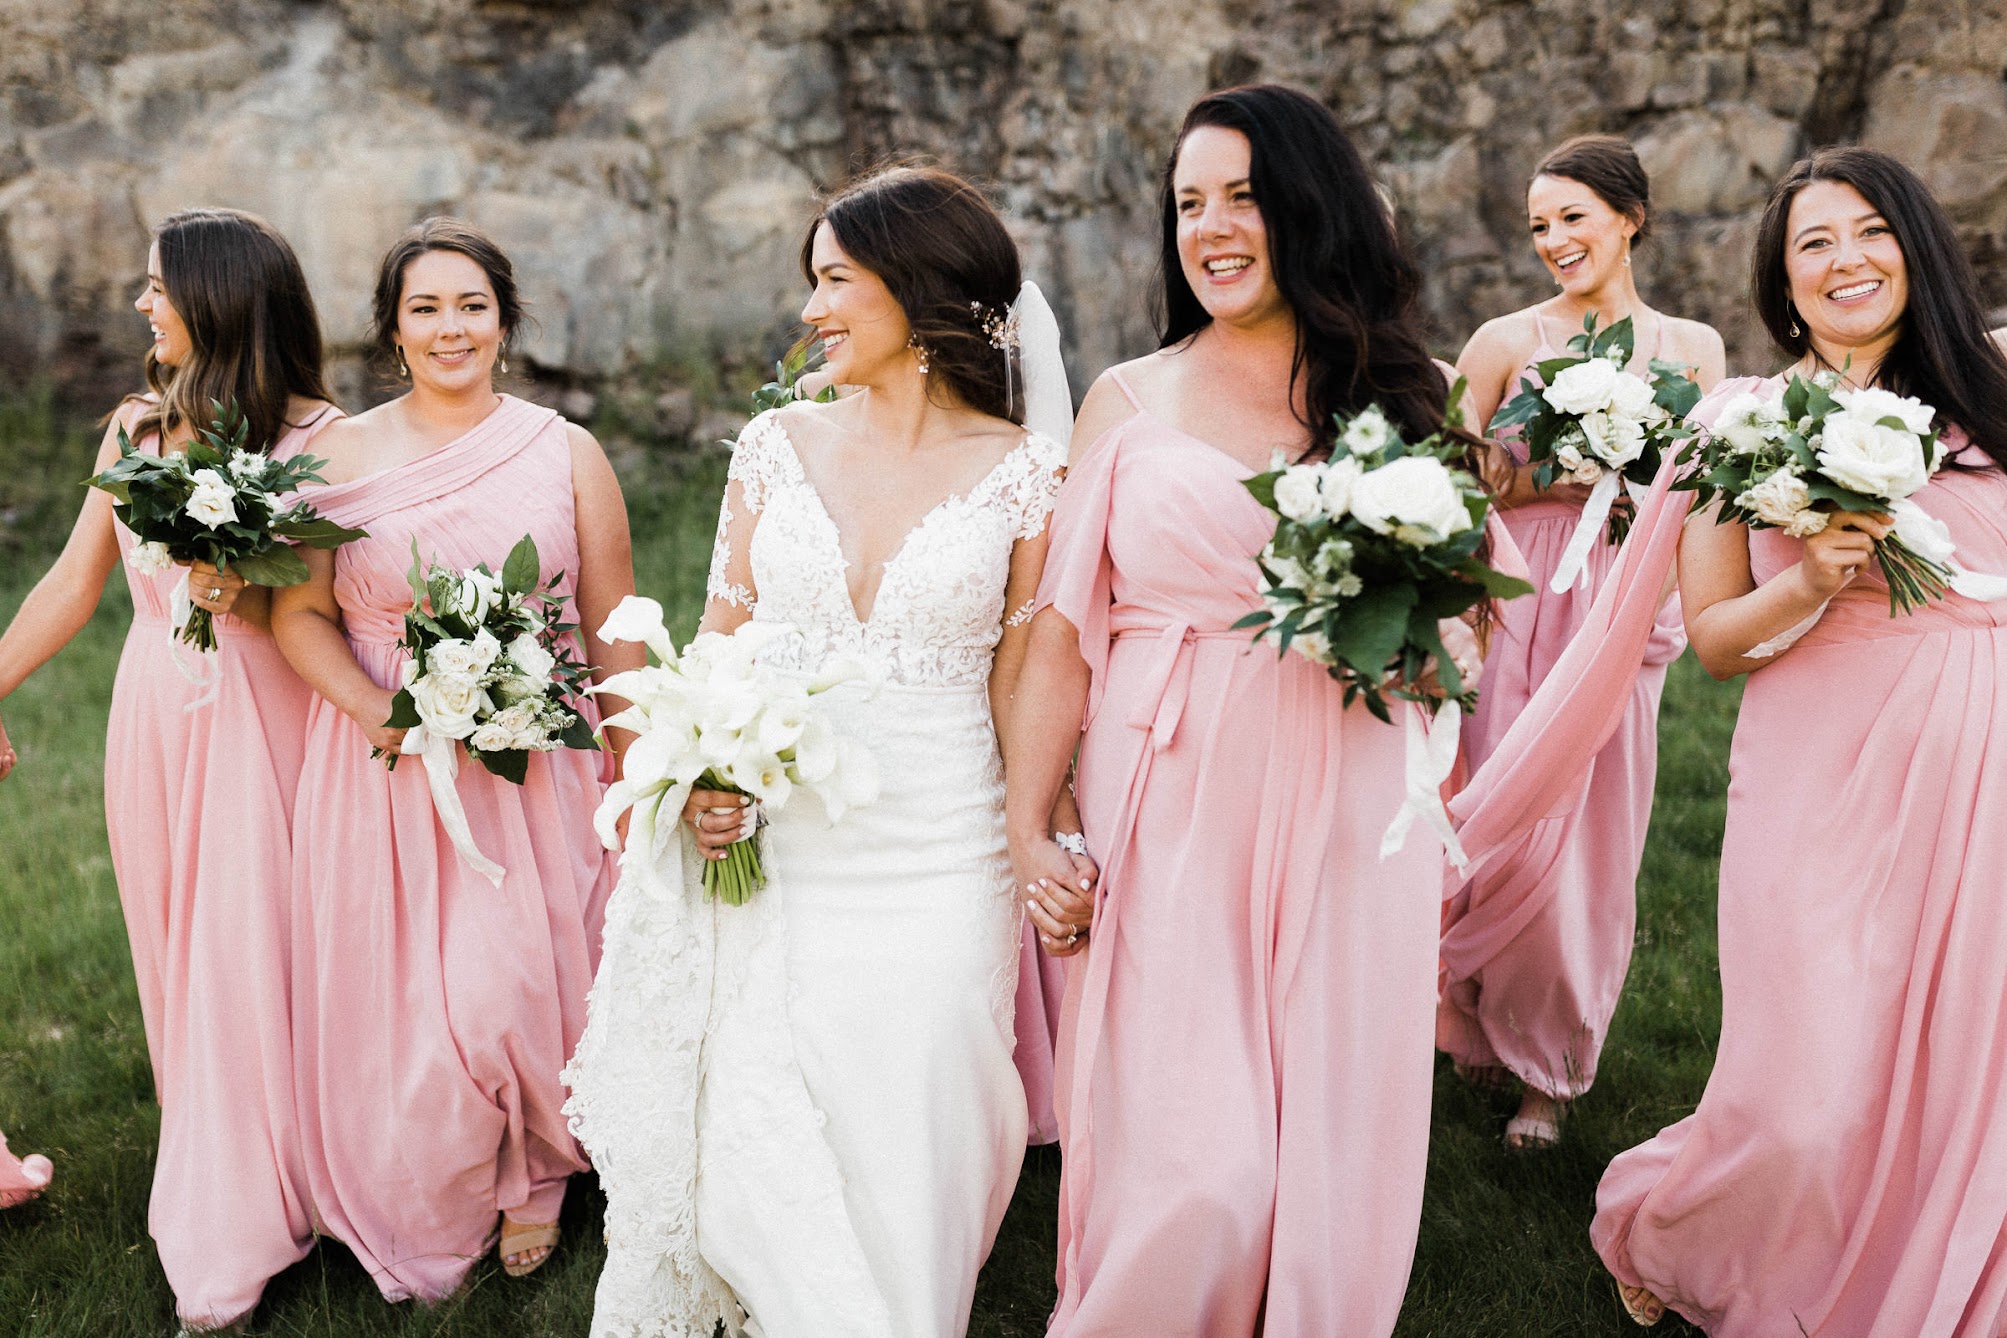 Bride is holding hands with her maid of honor while the other bridesmaids walk behind them.  